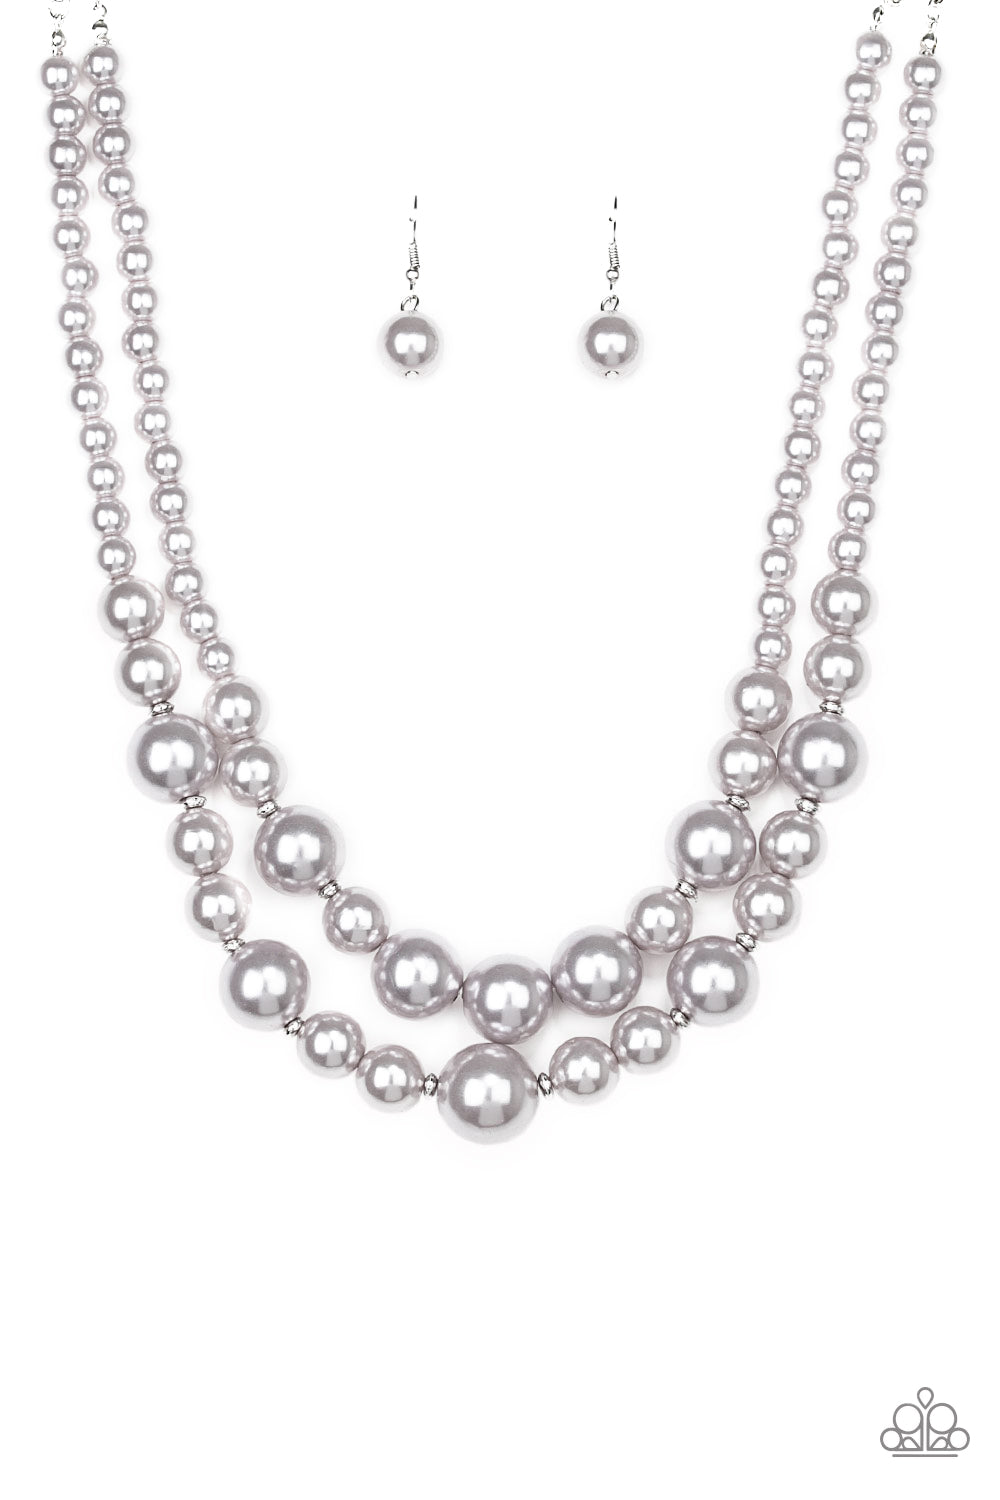 THE MORE THE MODEST SILVER-NECKLACE